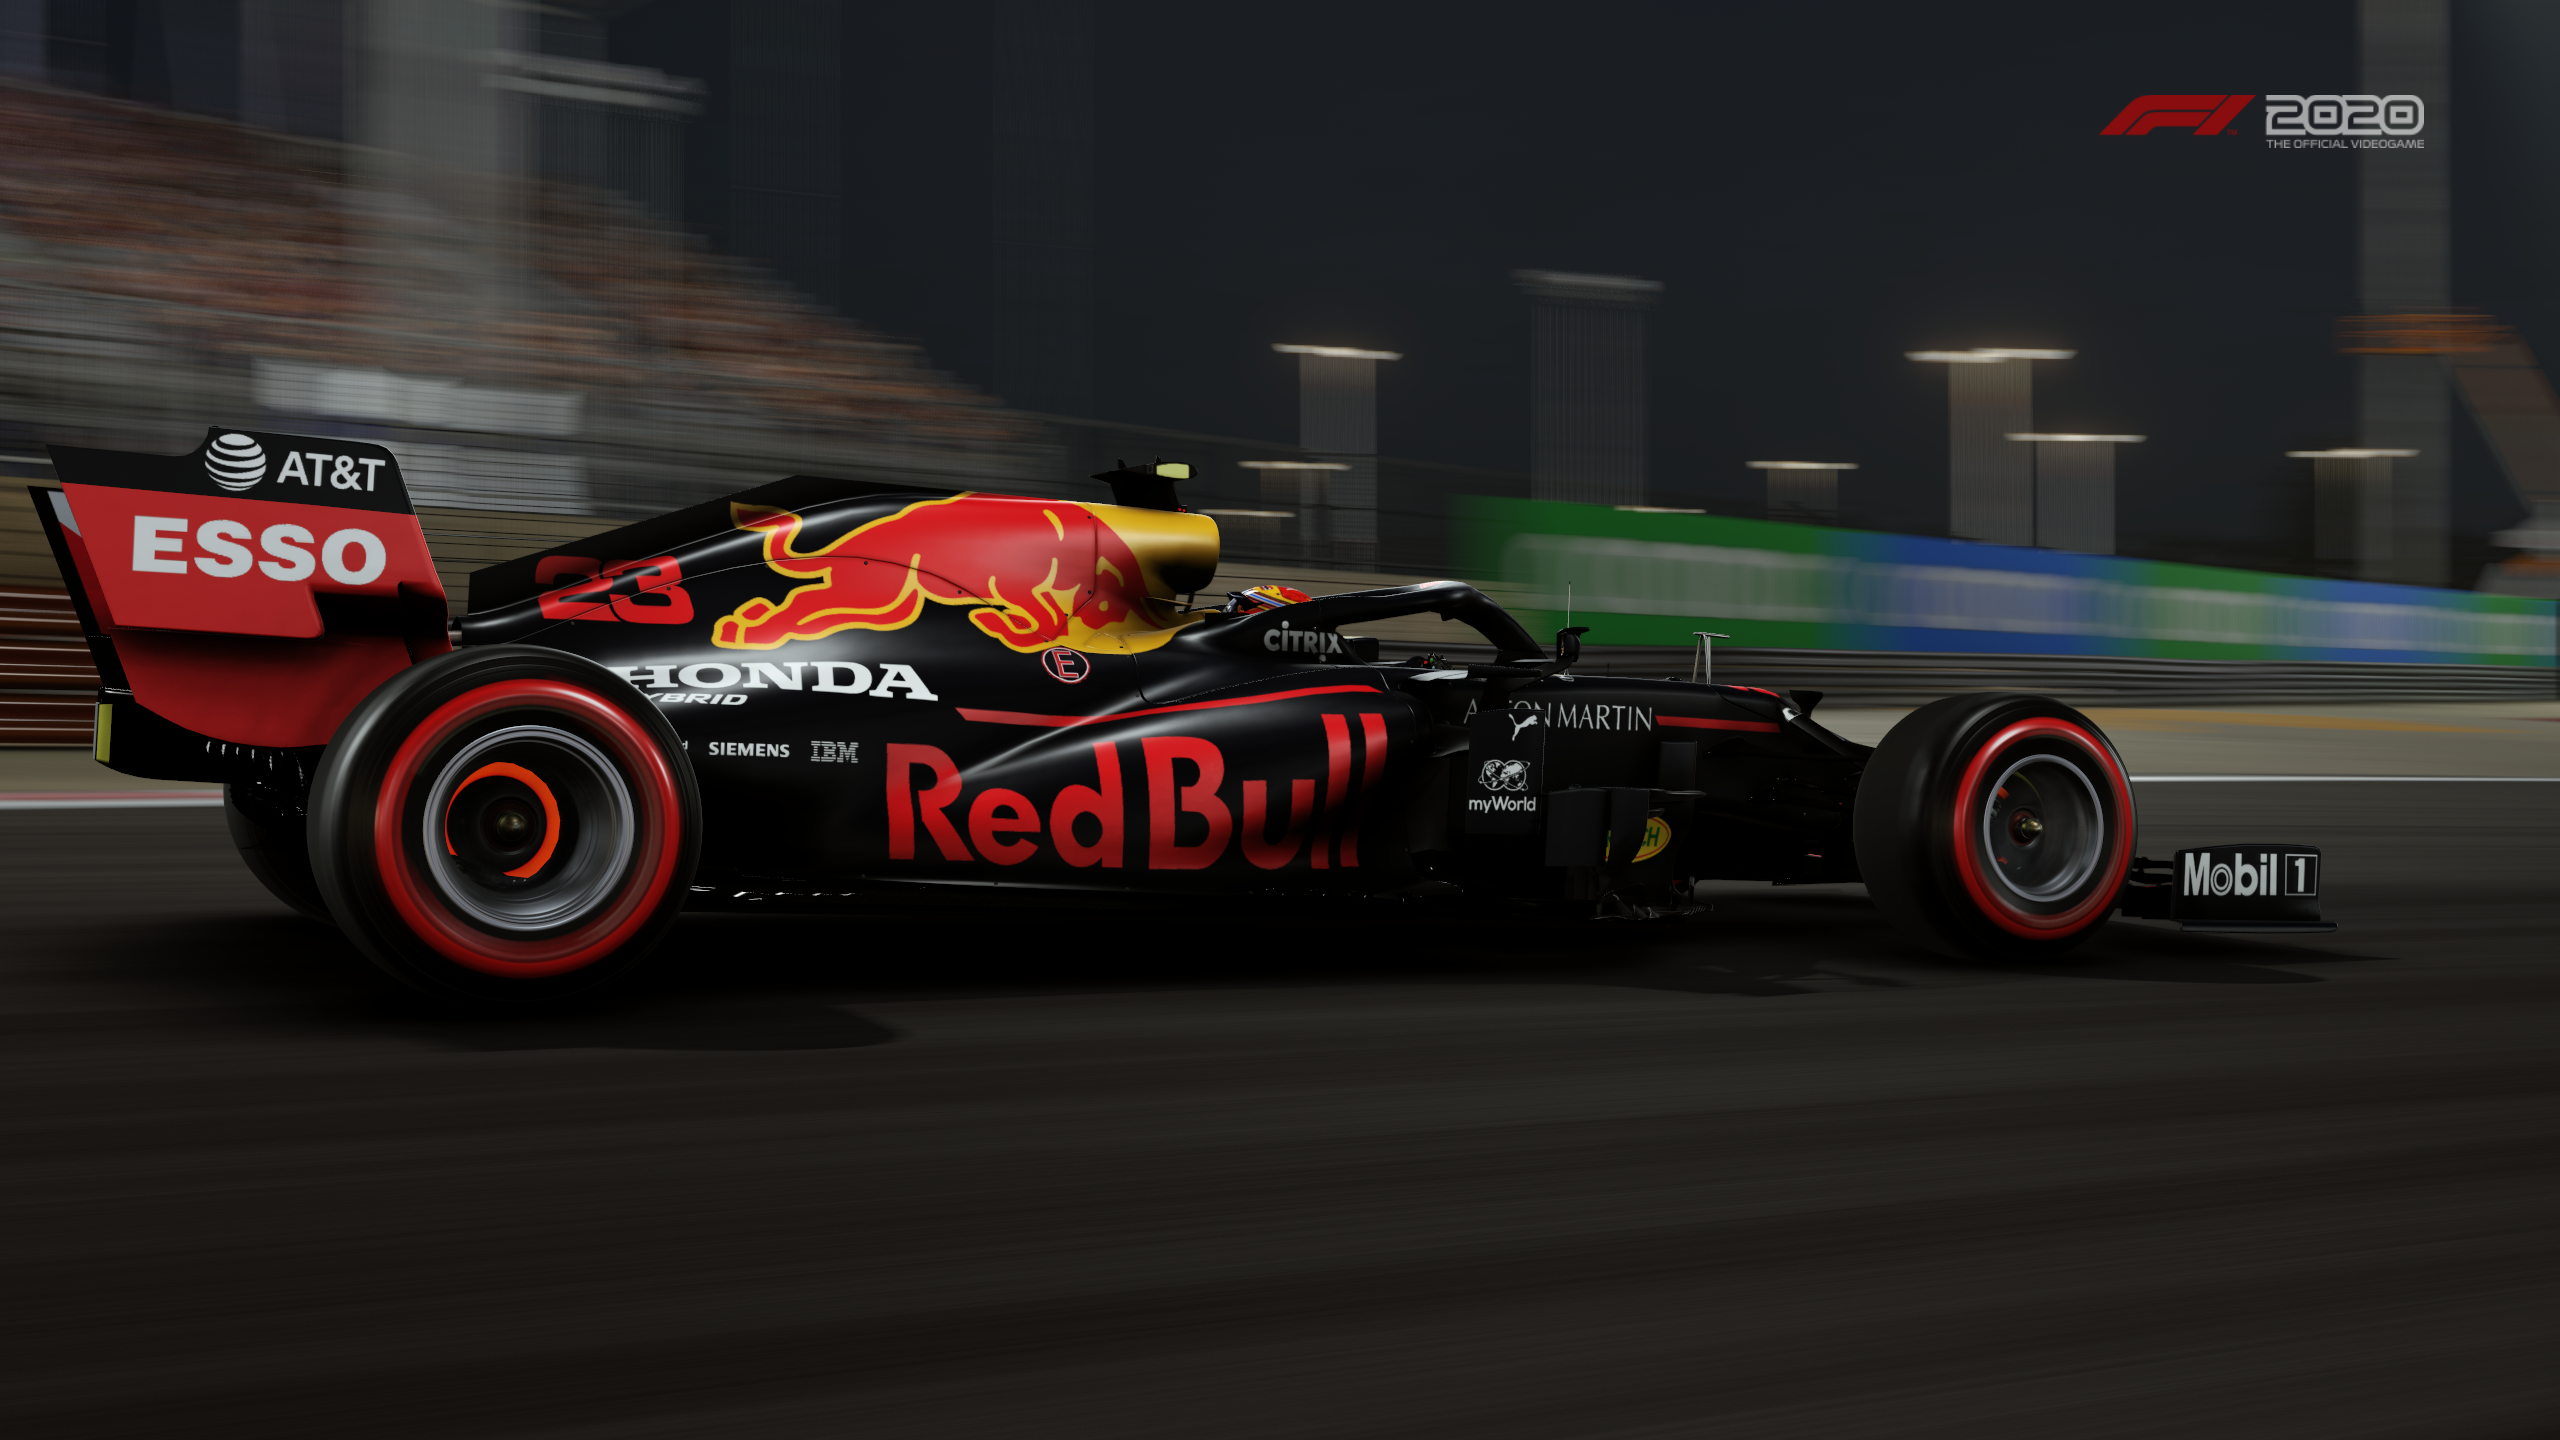 2560x1440 Red Bull Racing F1 Wallpapers